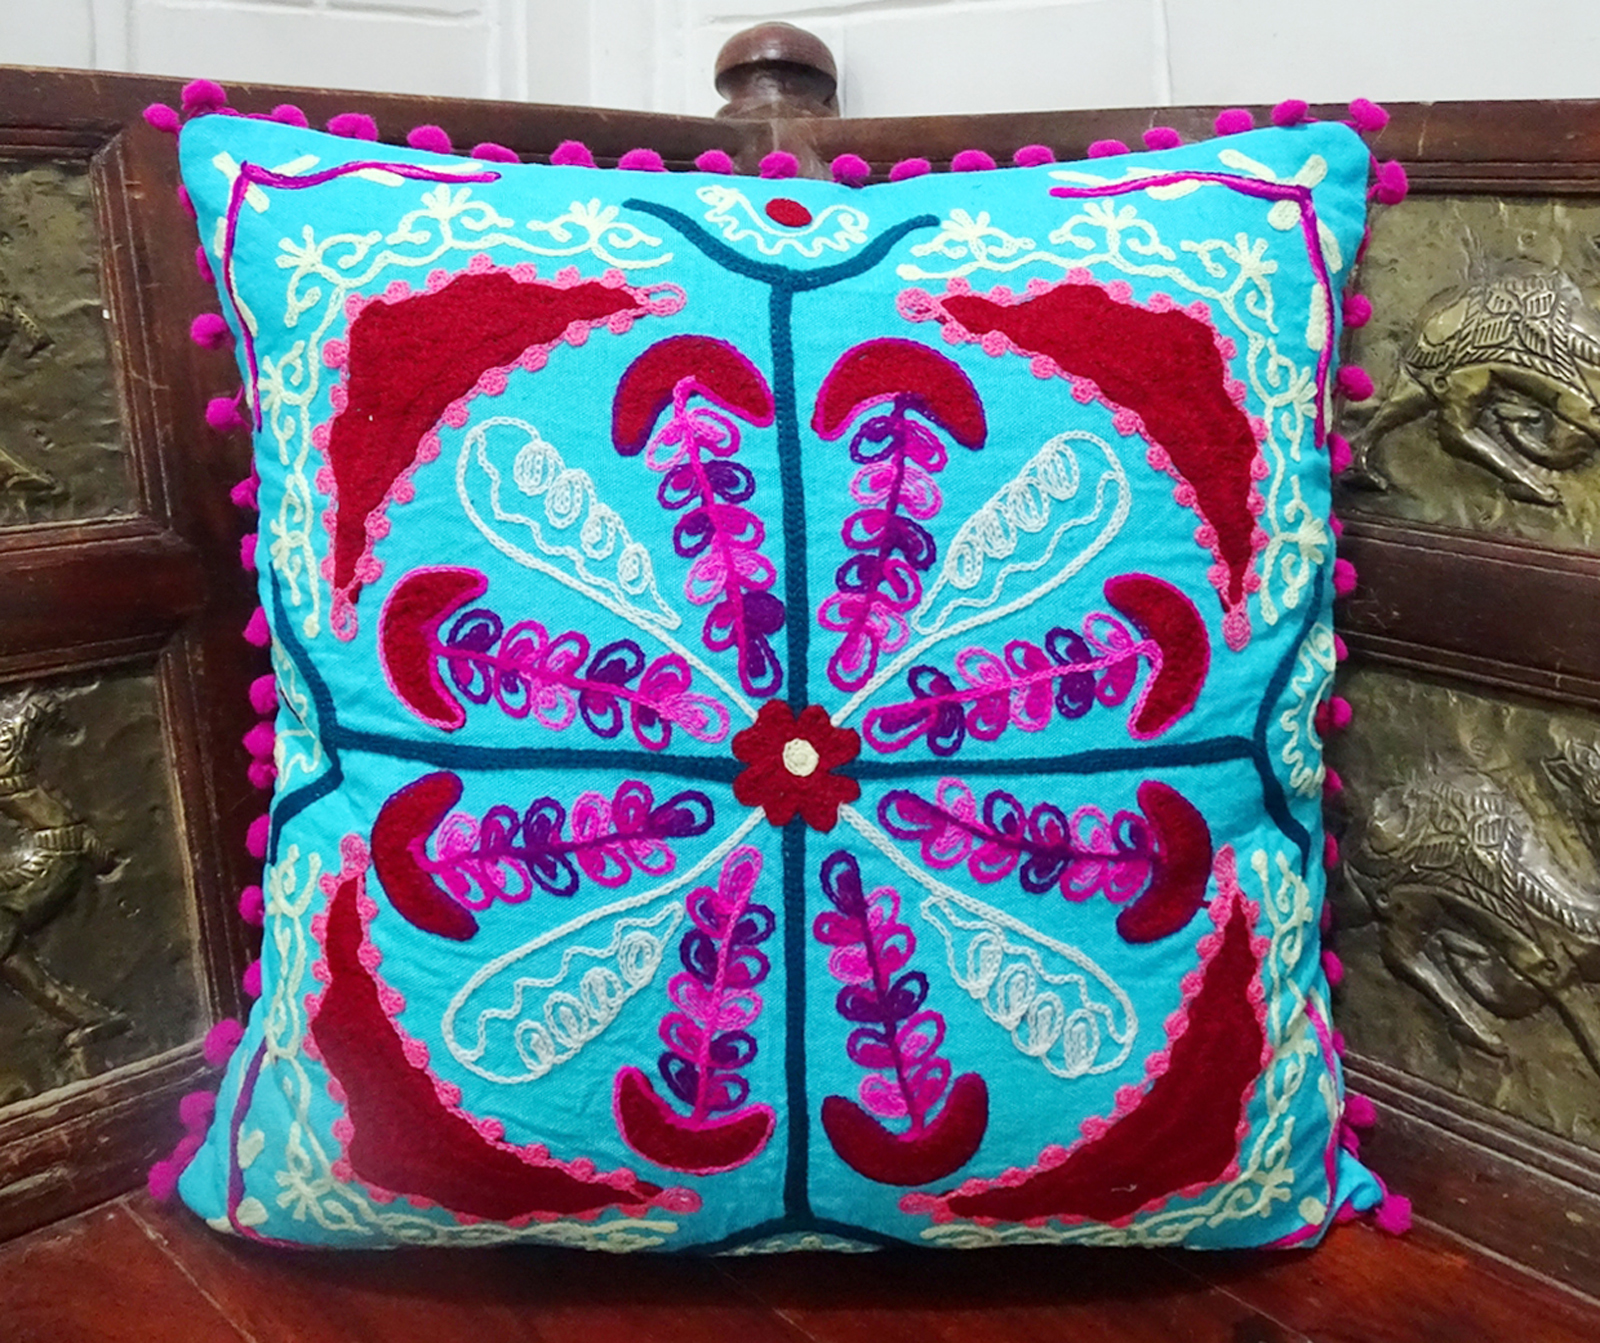 Embroidery Cushion Covers